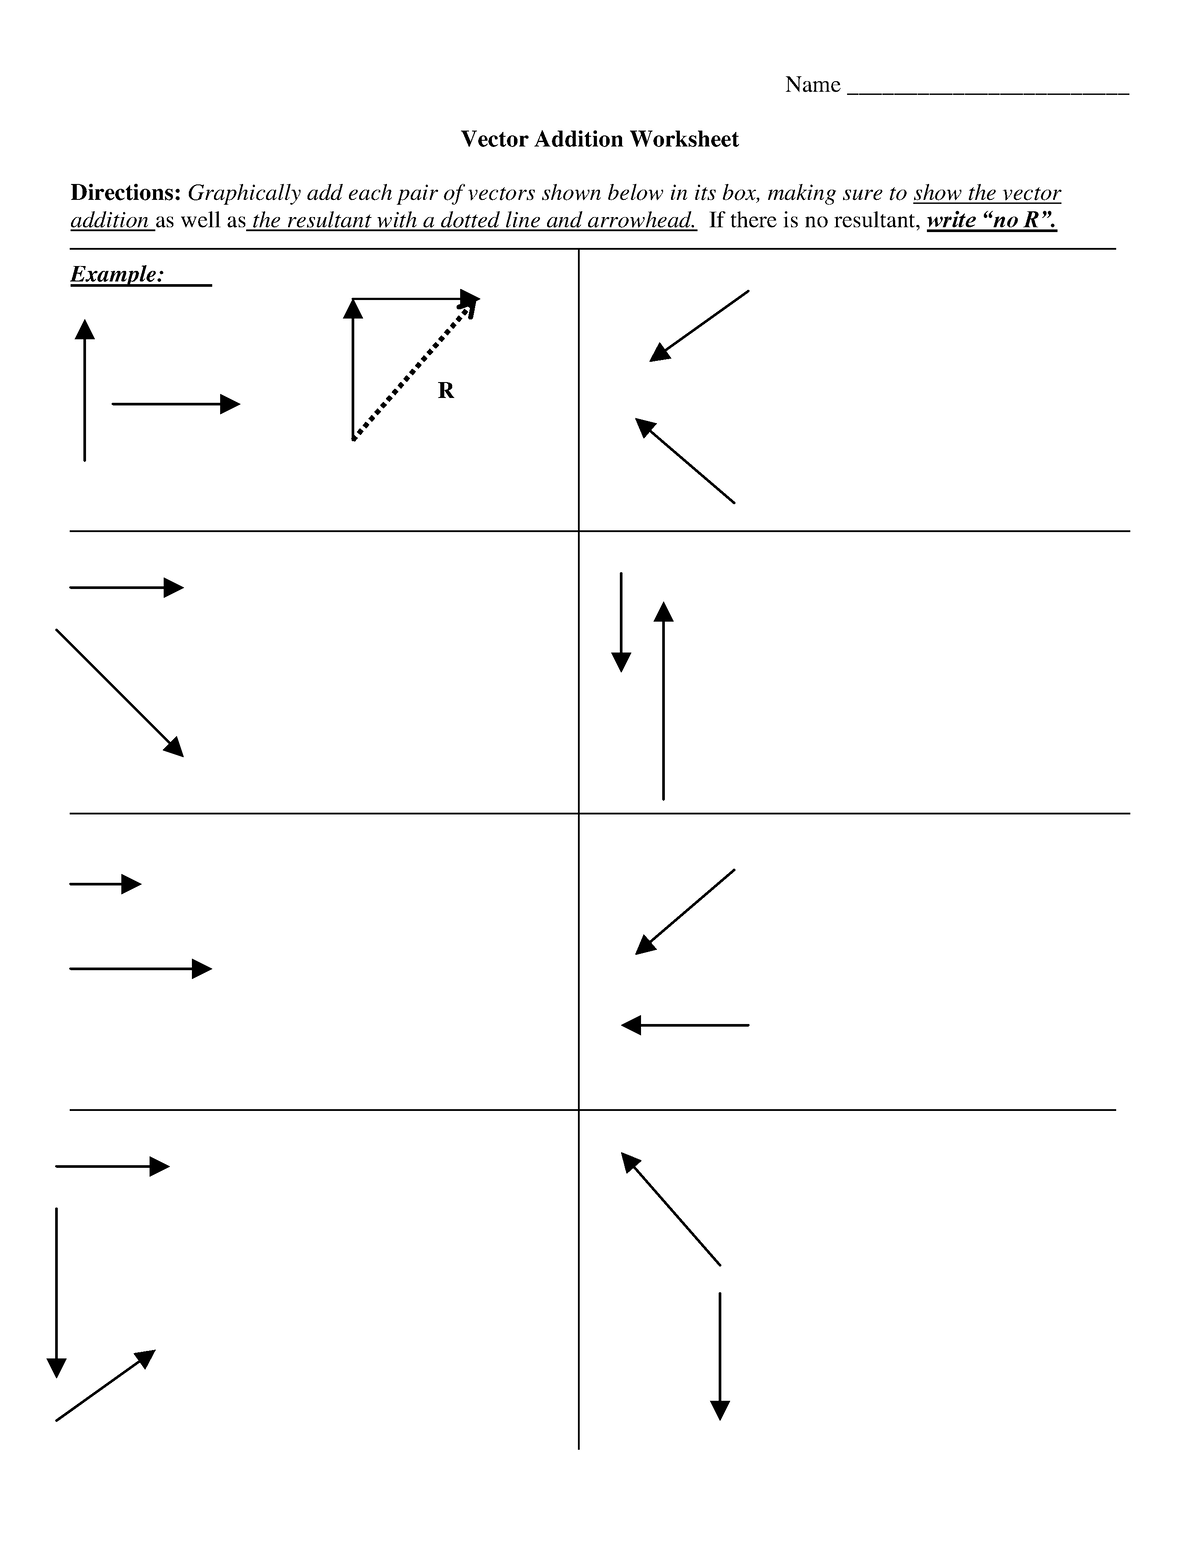 HW221.21 Vector Addition Worksheet - Math in the Modern World Throughout Vectors Worksheet With Answers